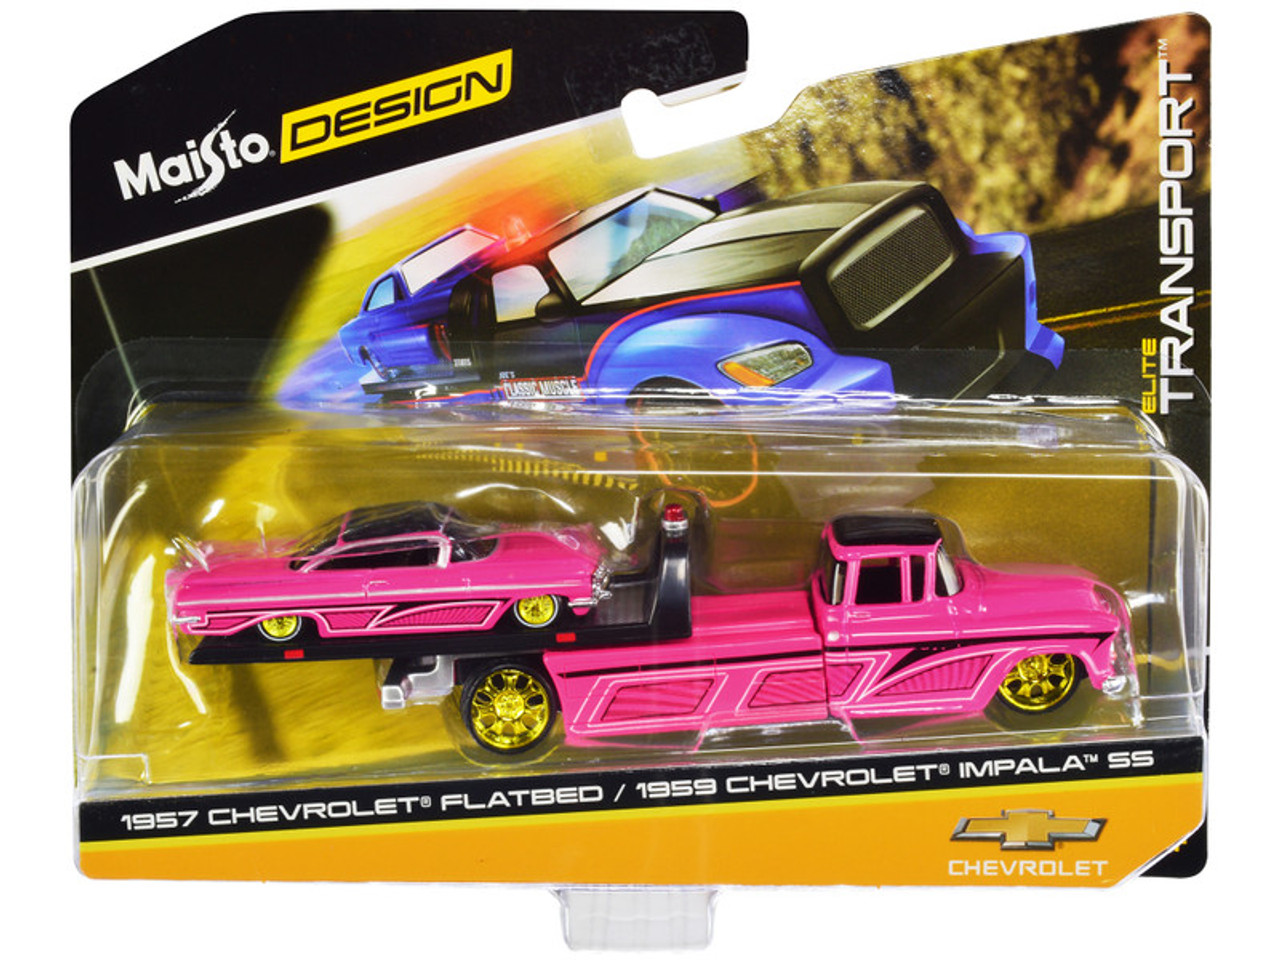 1957 Chevrolet Flatbed Truck and 1959 Chevrolet Impala SS Hot Pink with Black Top and Graphics "Elite Transport" Series 1/64 Diecast Models by Maisto